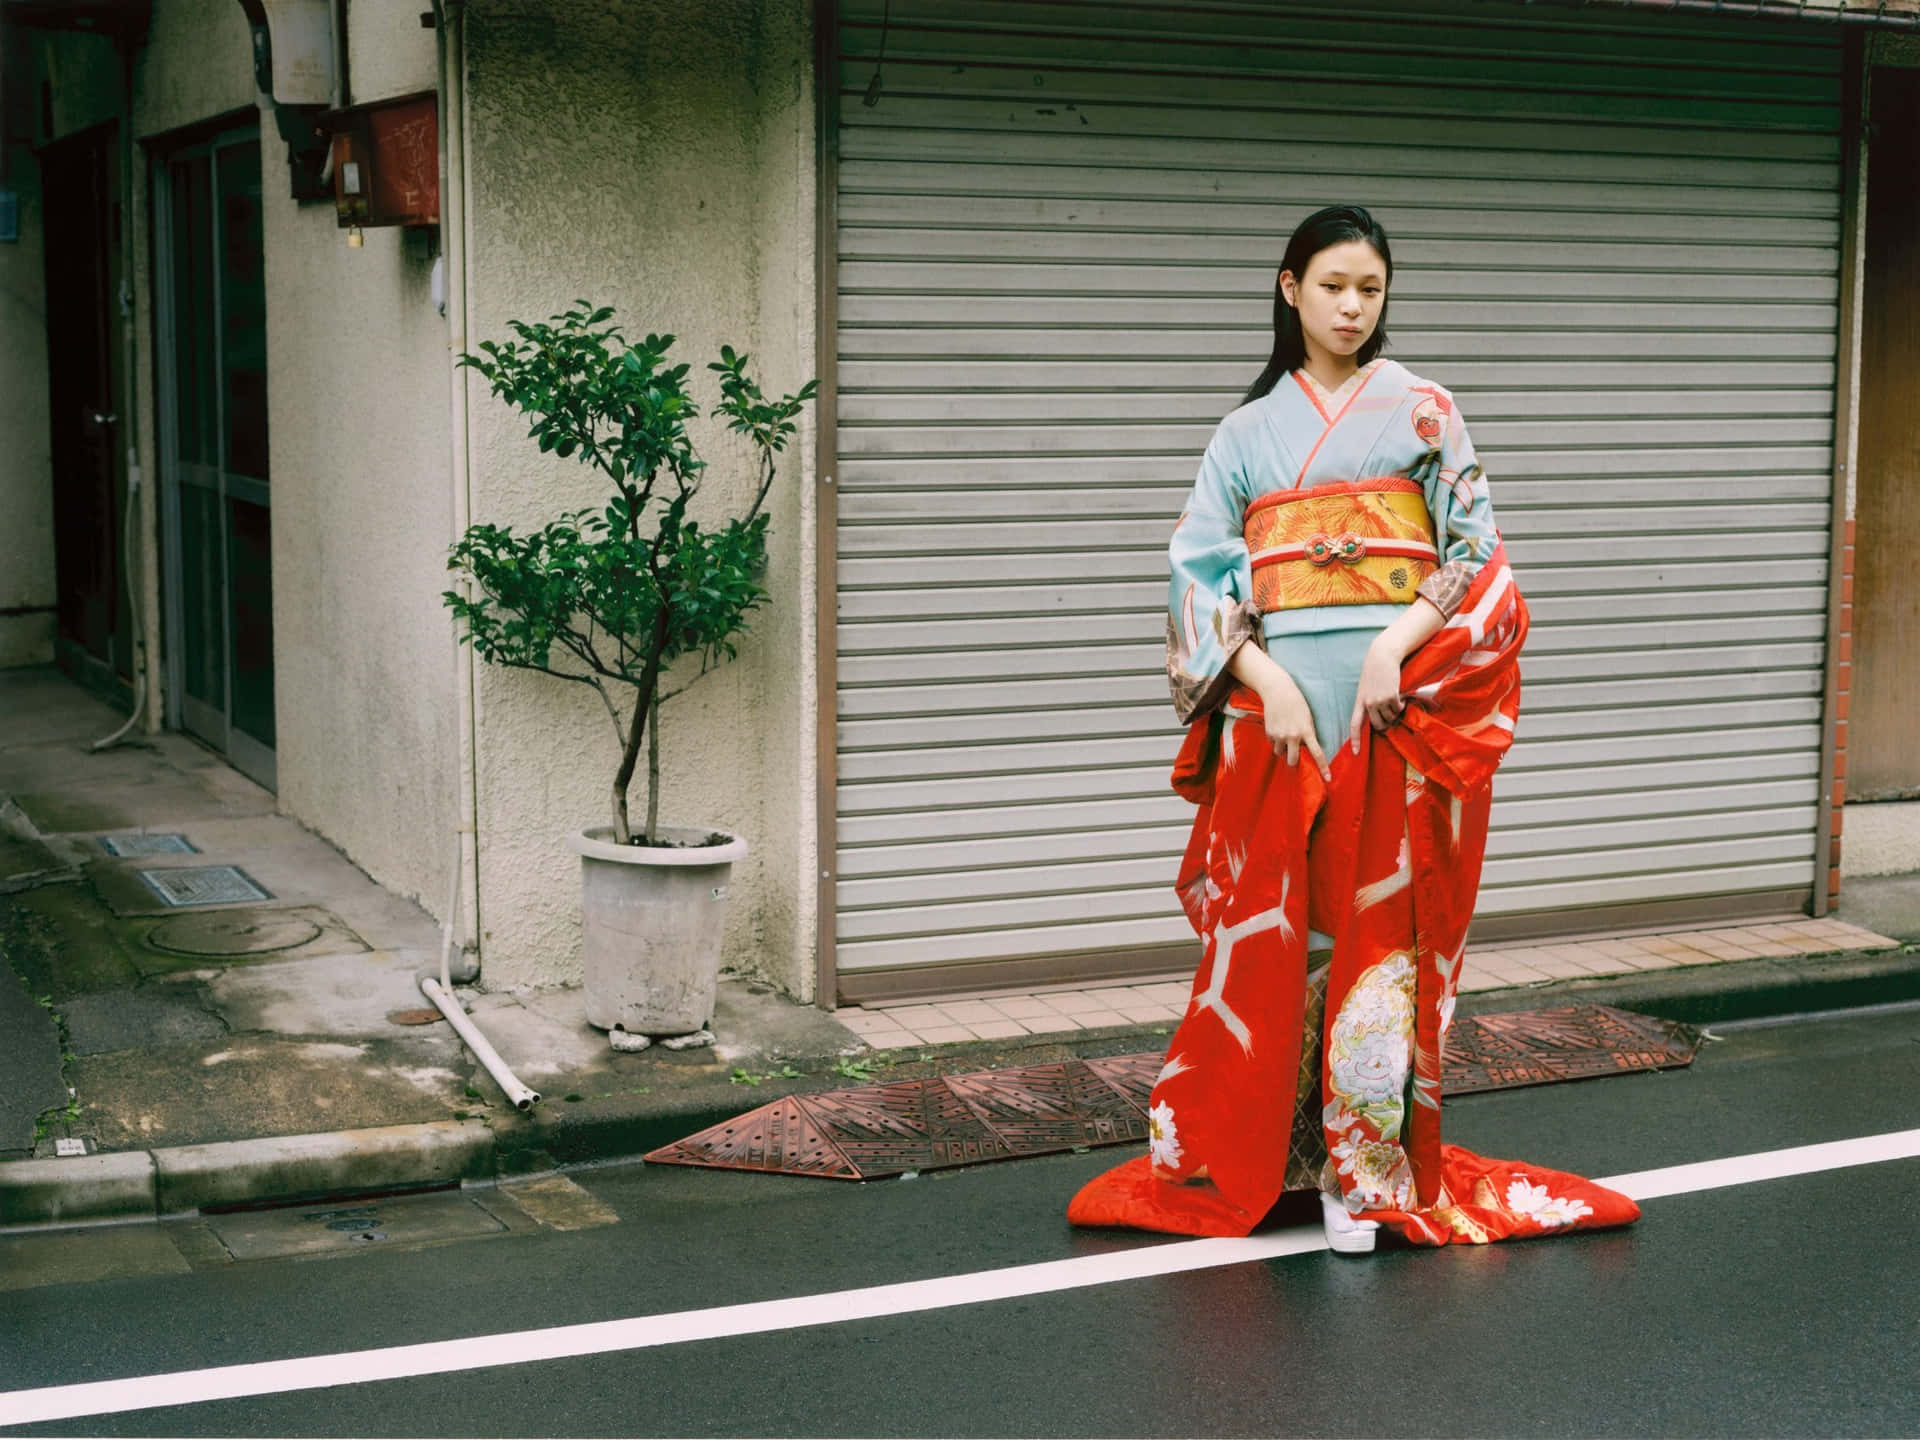 A Woman In A Red Kimono Standing On The Street